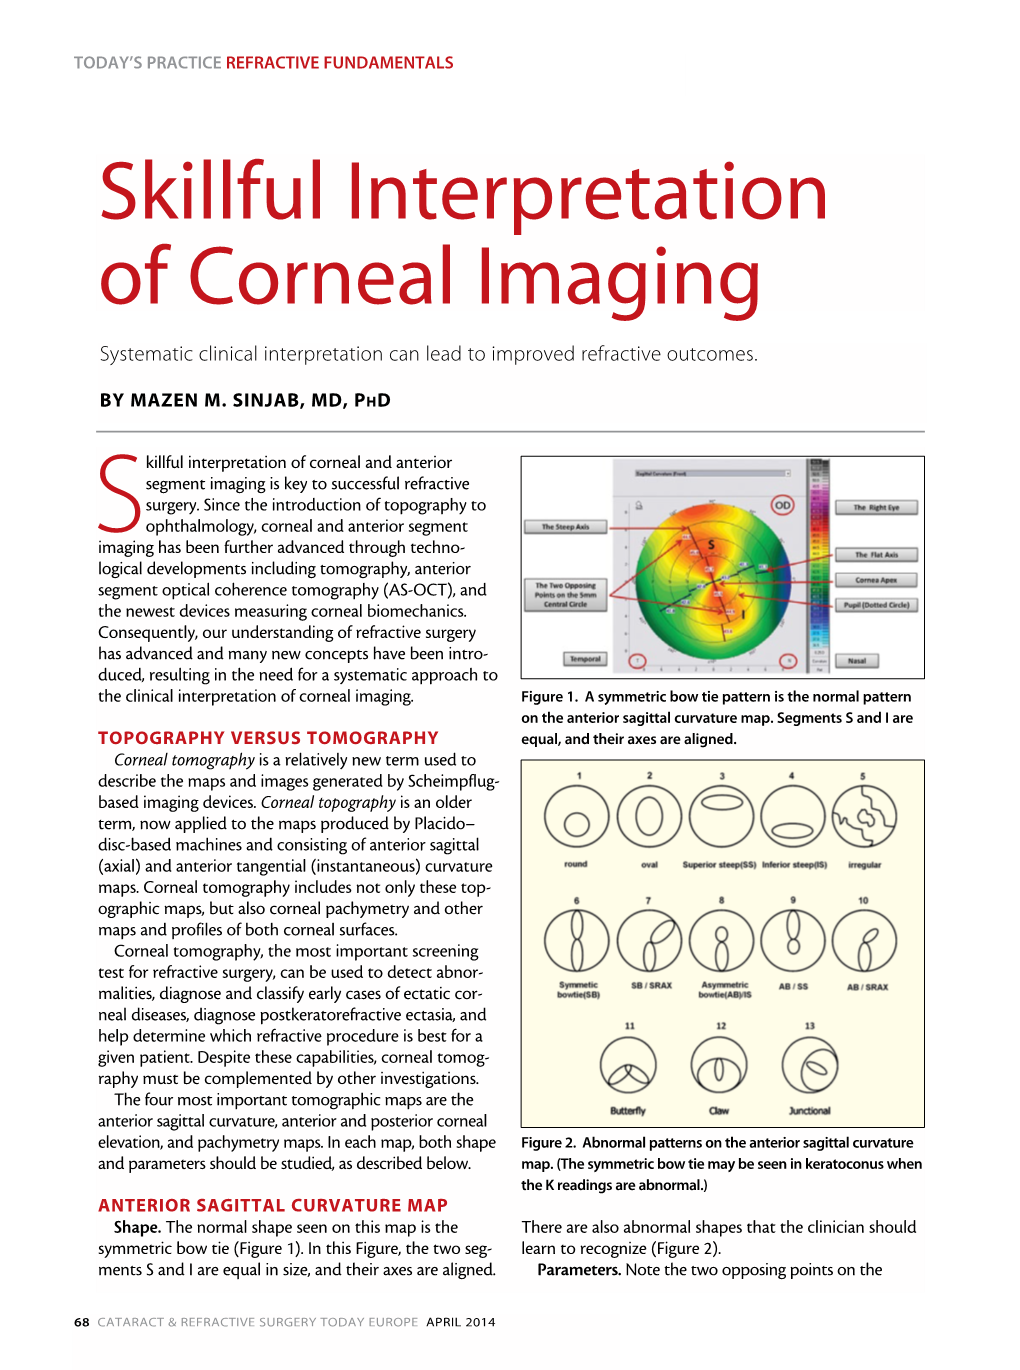 Skillful Interpretation of Corneal Imaging Systematic Clinical Interpretation Can Lead to Improved Refractive Outcomes